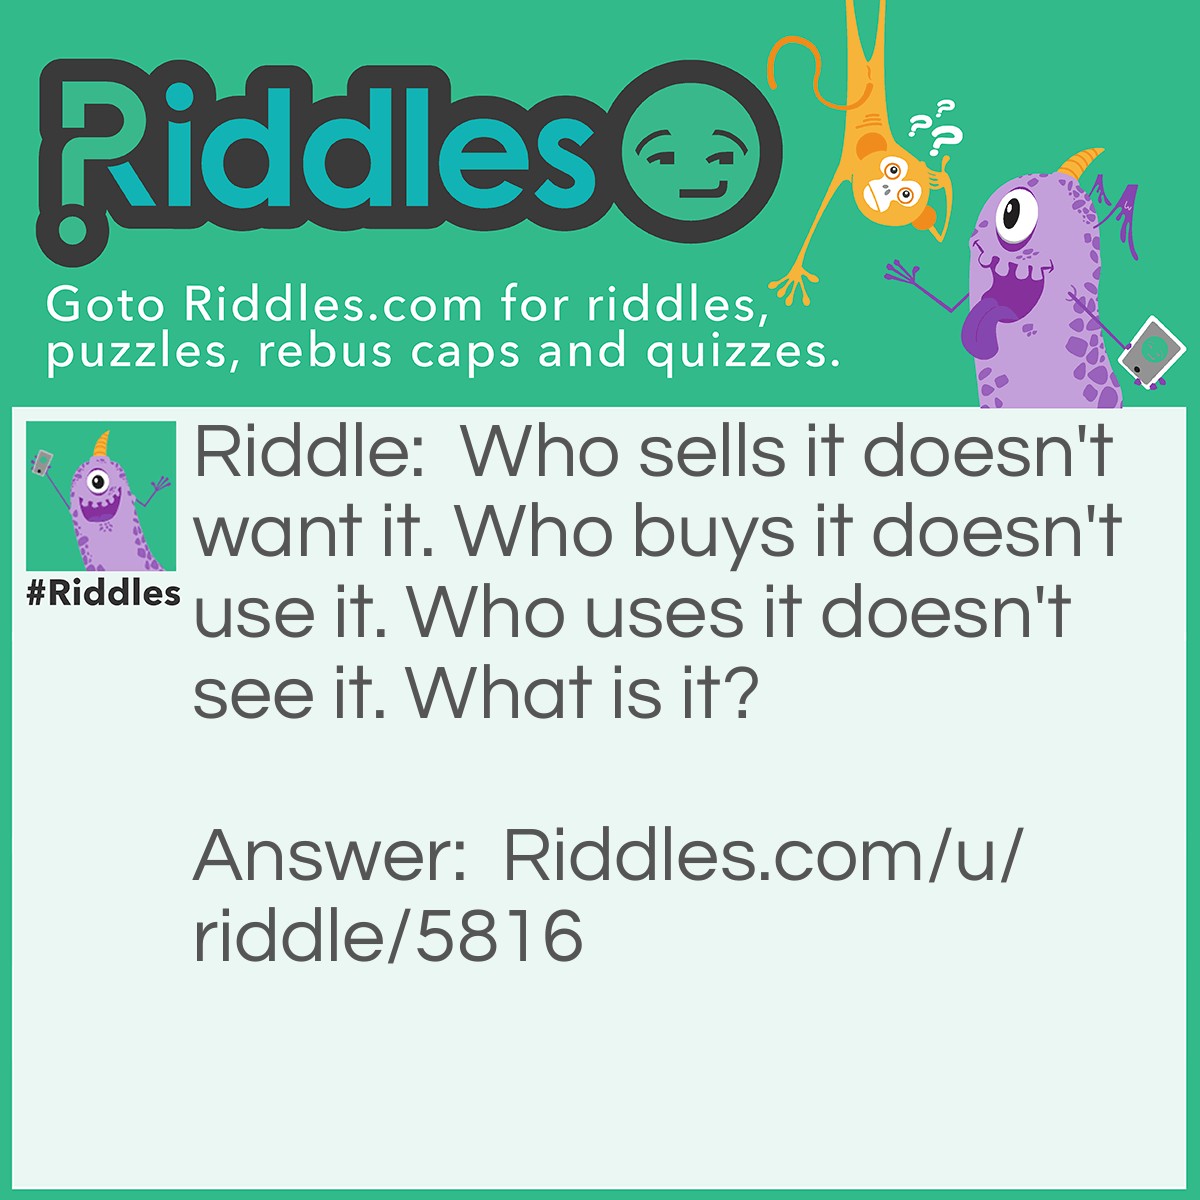 Riddle: Who sells it doesn't want it. Who buys it doesn't use it. Who uses it doesn't see it. What is it? Answer: The coffin.